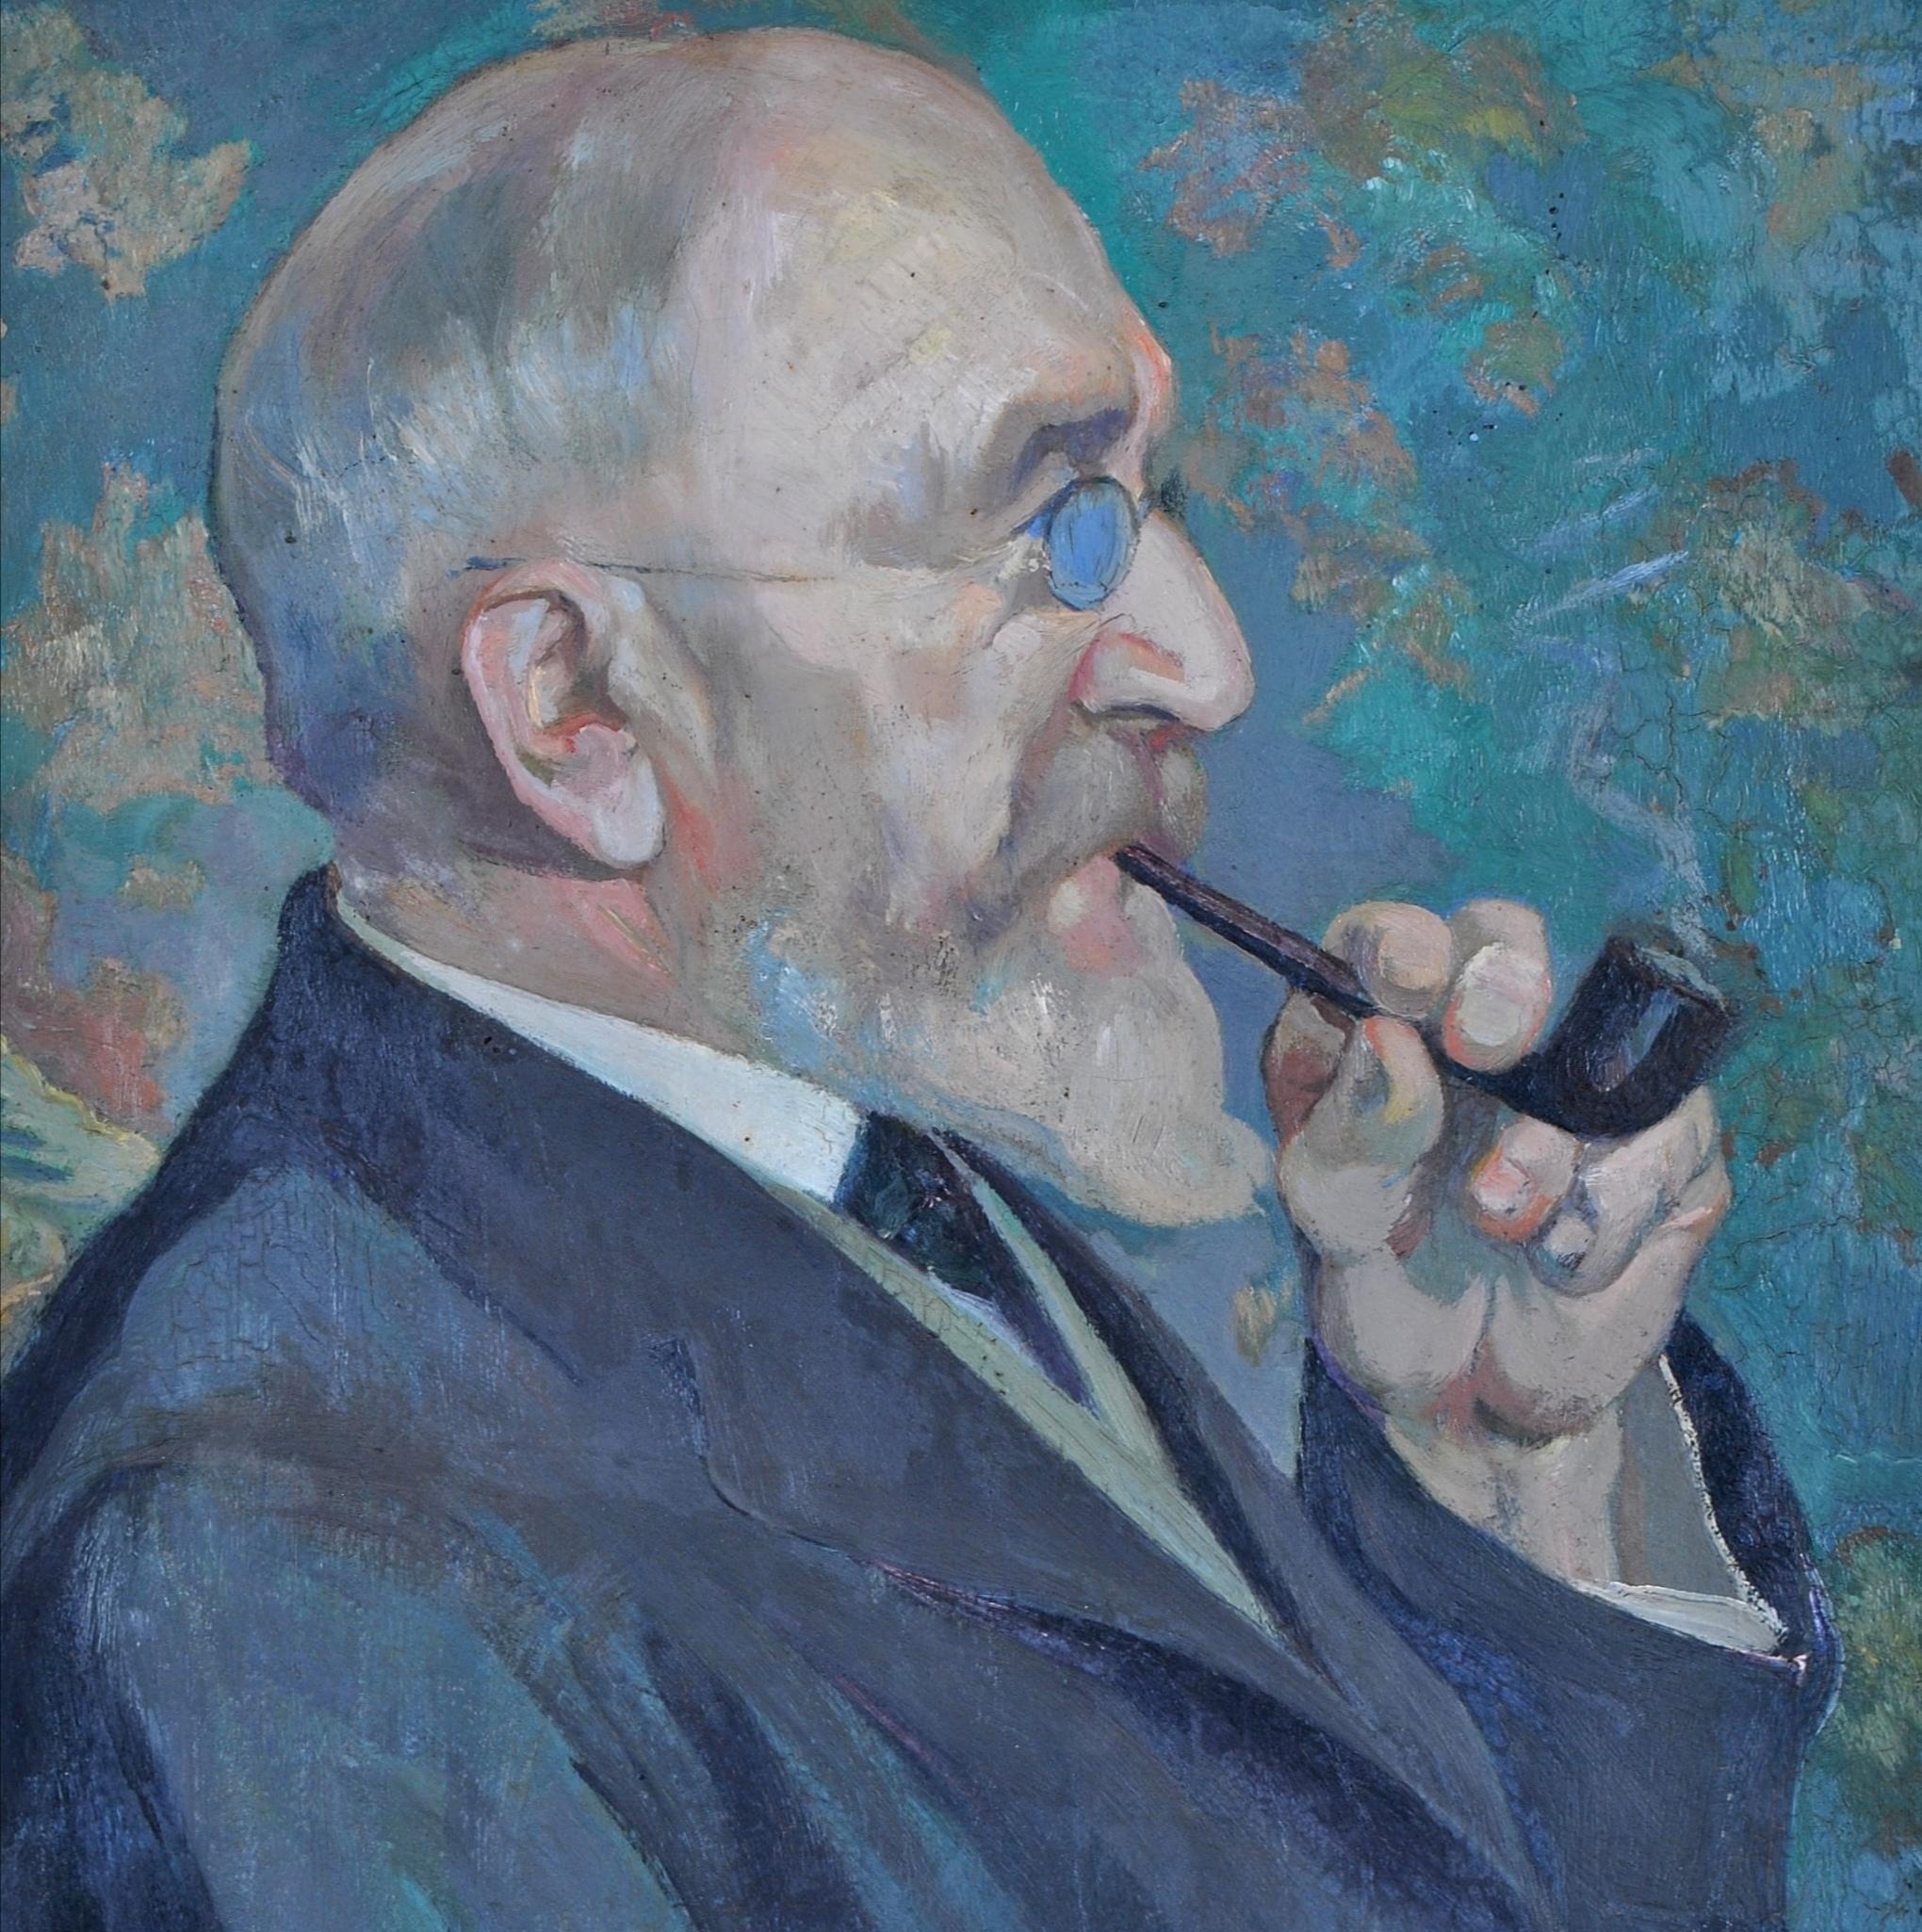 A striking c.1930 French post-impressionist oil on board portrait of a gentleman smoking a pipe by Antonin Guéton. Excellent quality and condition post-impressionist portrait. Signed lower right and presented in a gilt frame.

Artist: Antonin Guéton